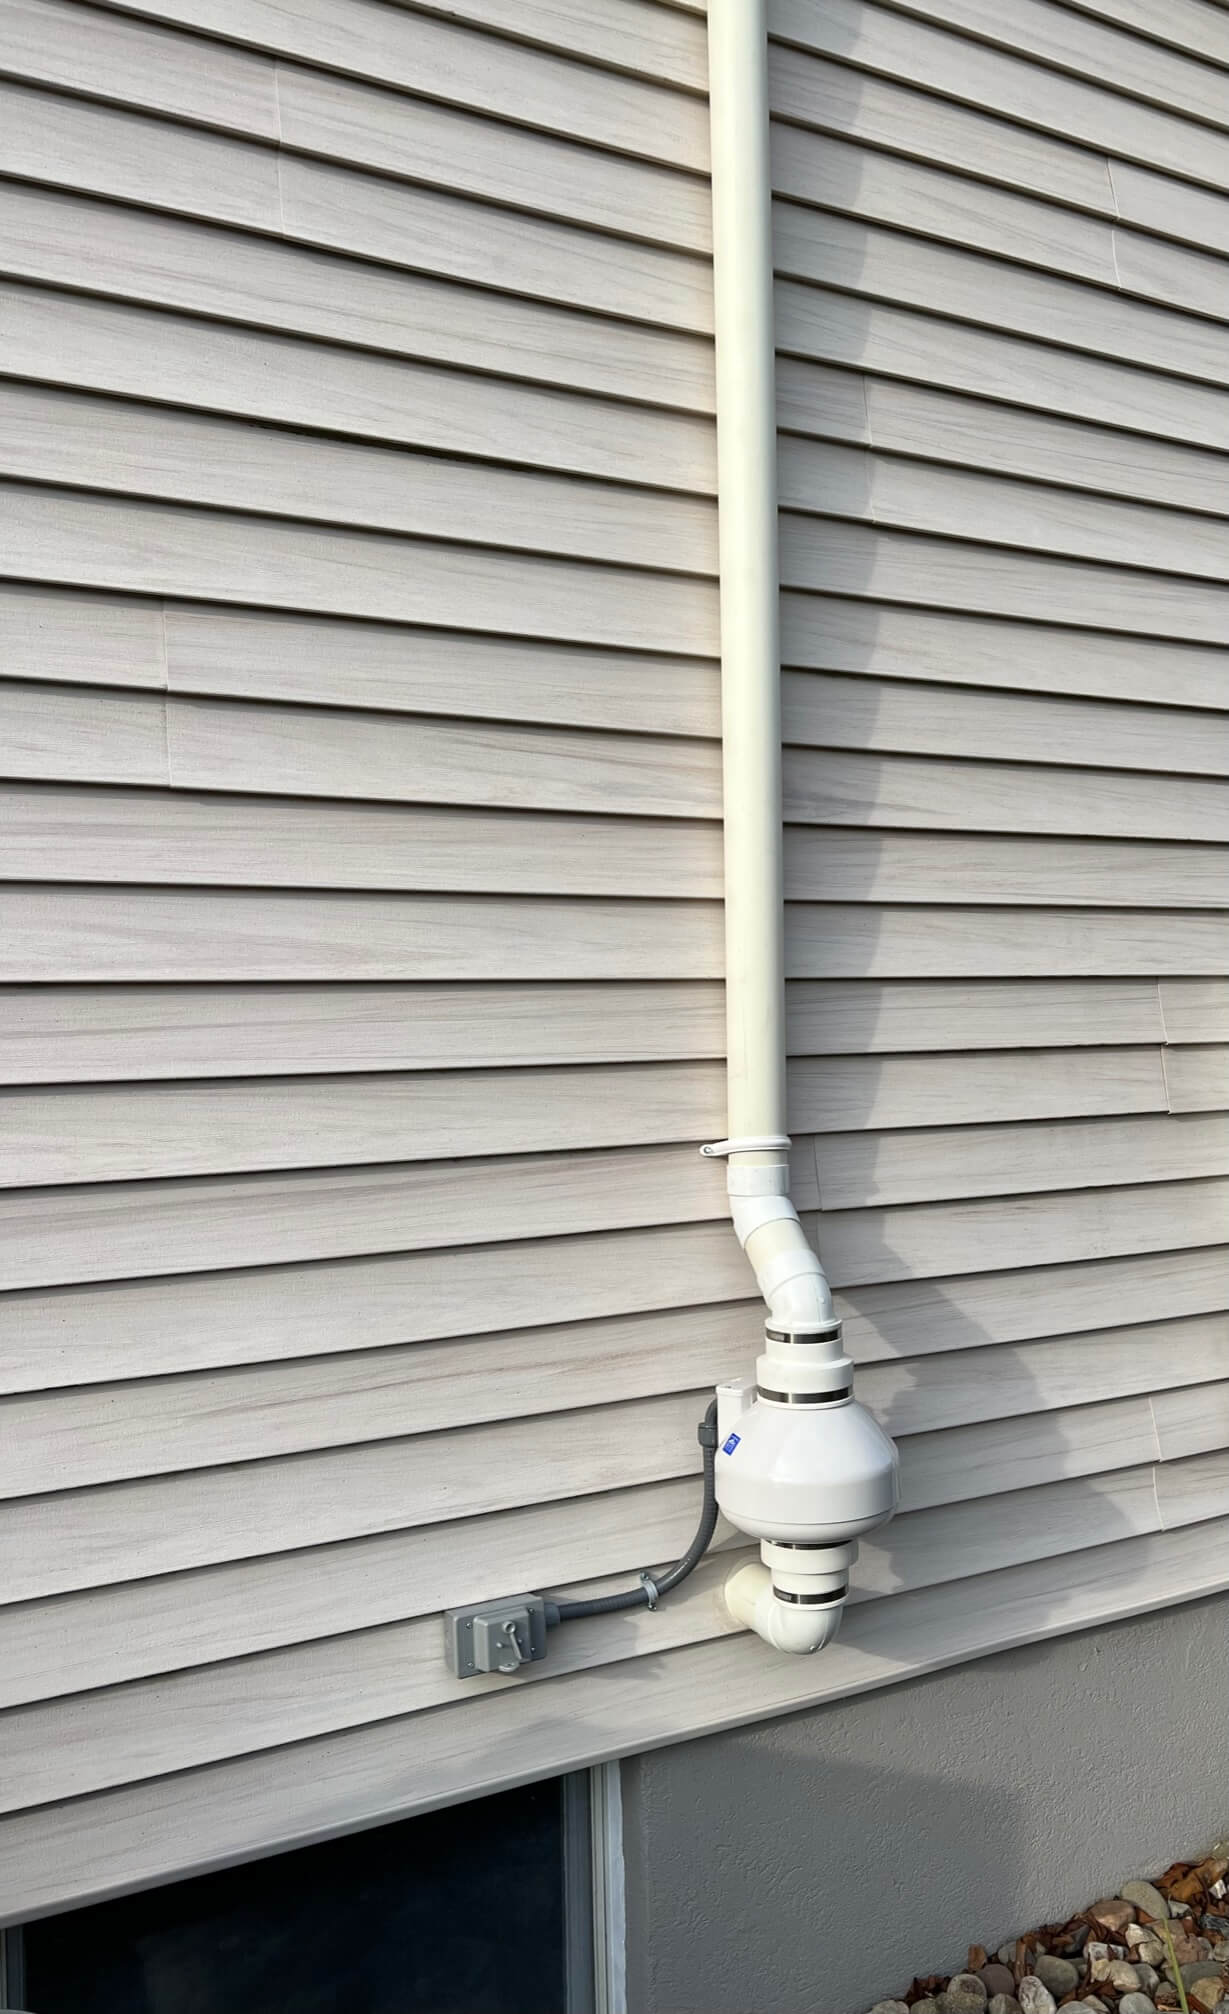 Residential radon mitigation system with clear labeling